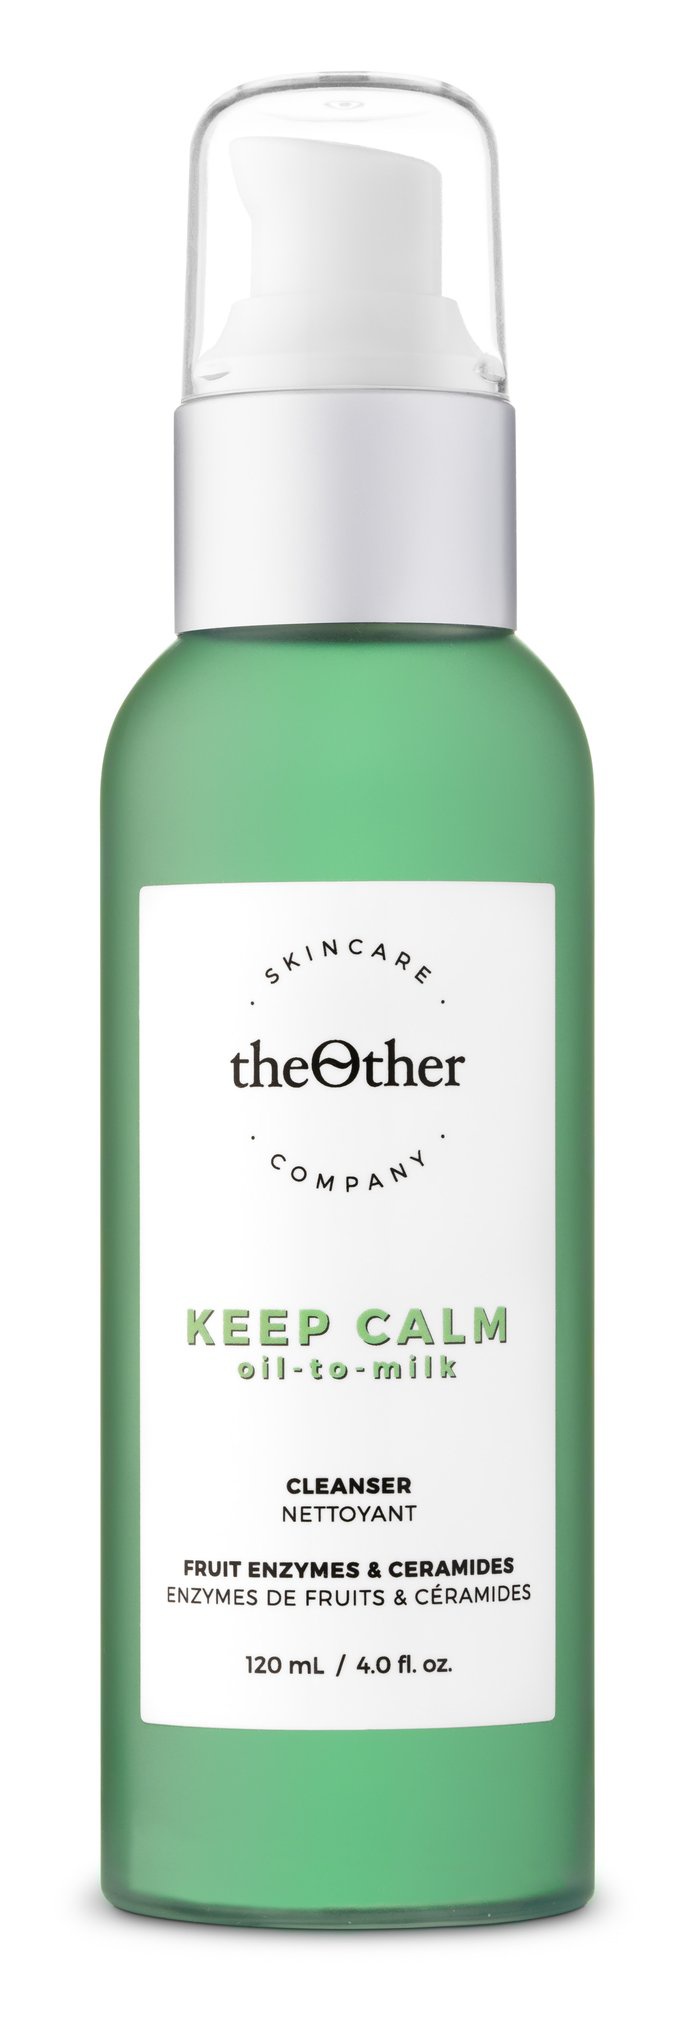 The Other Skincare Company Keep Calm Oil-To-Milk Cleanser